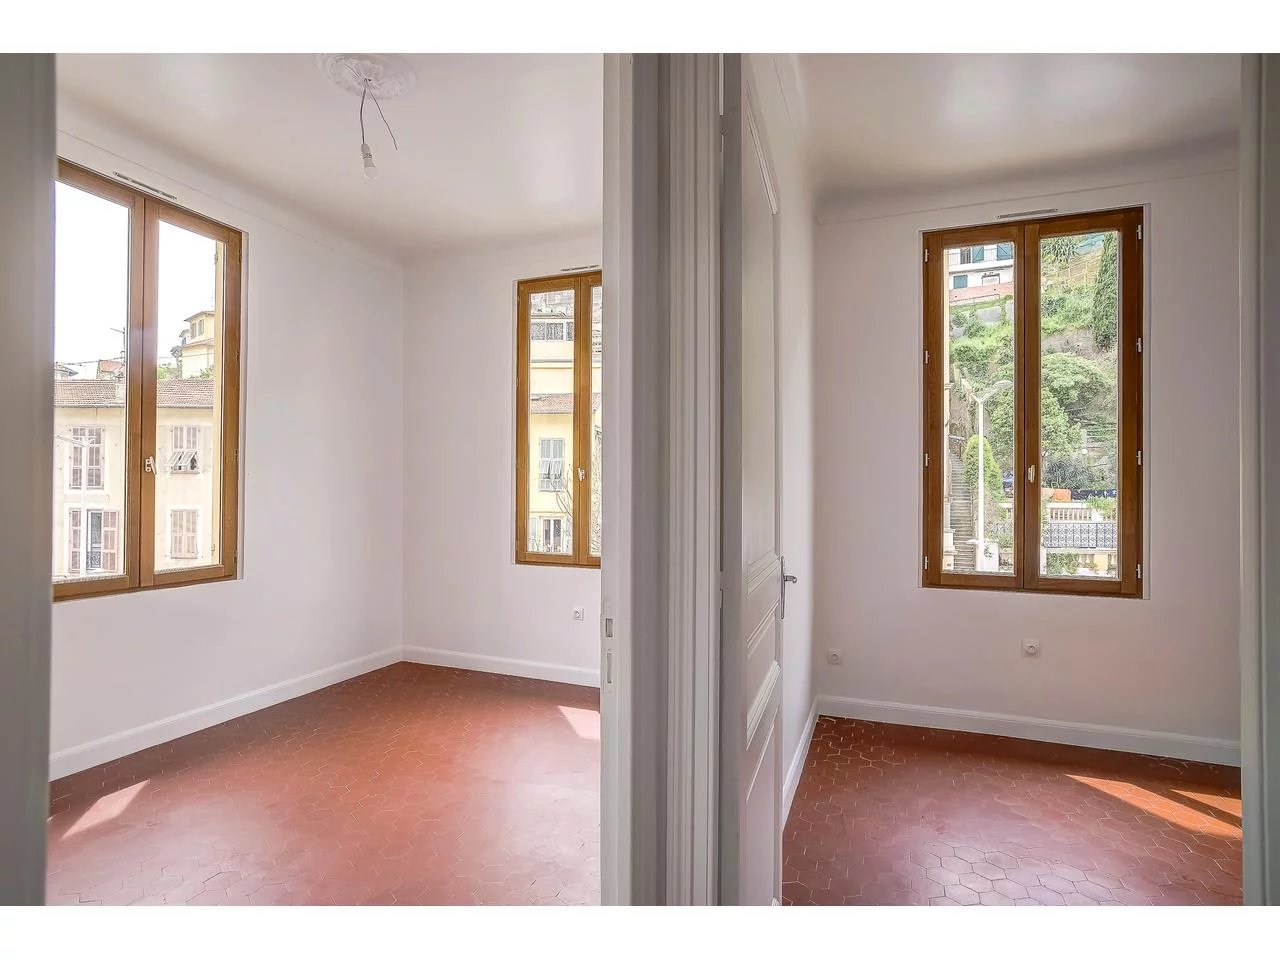 Appartement  2 Rooms 36m2  for sale   189 000 €